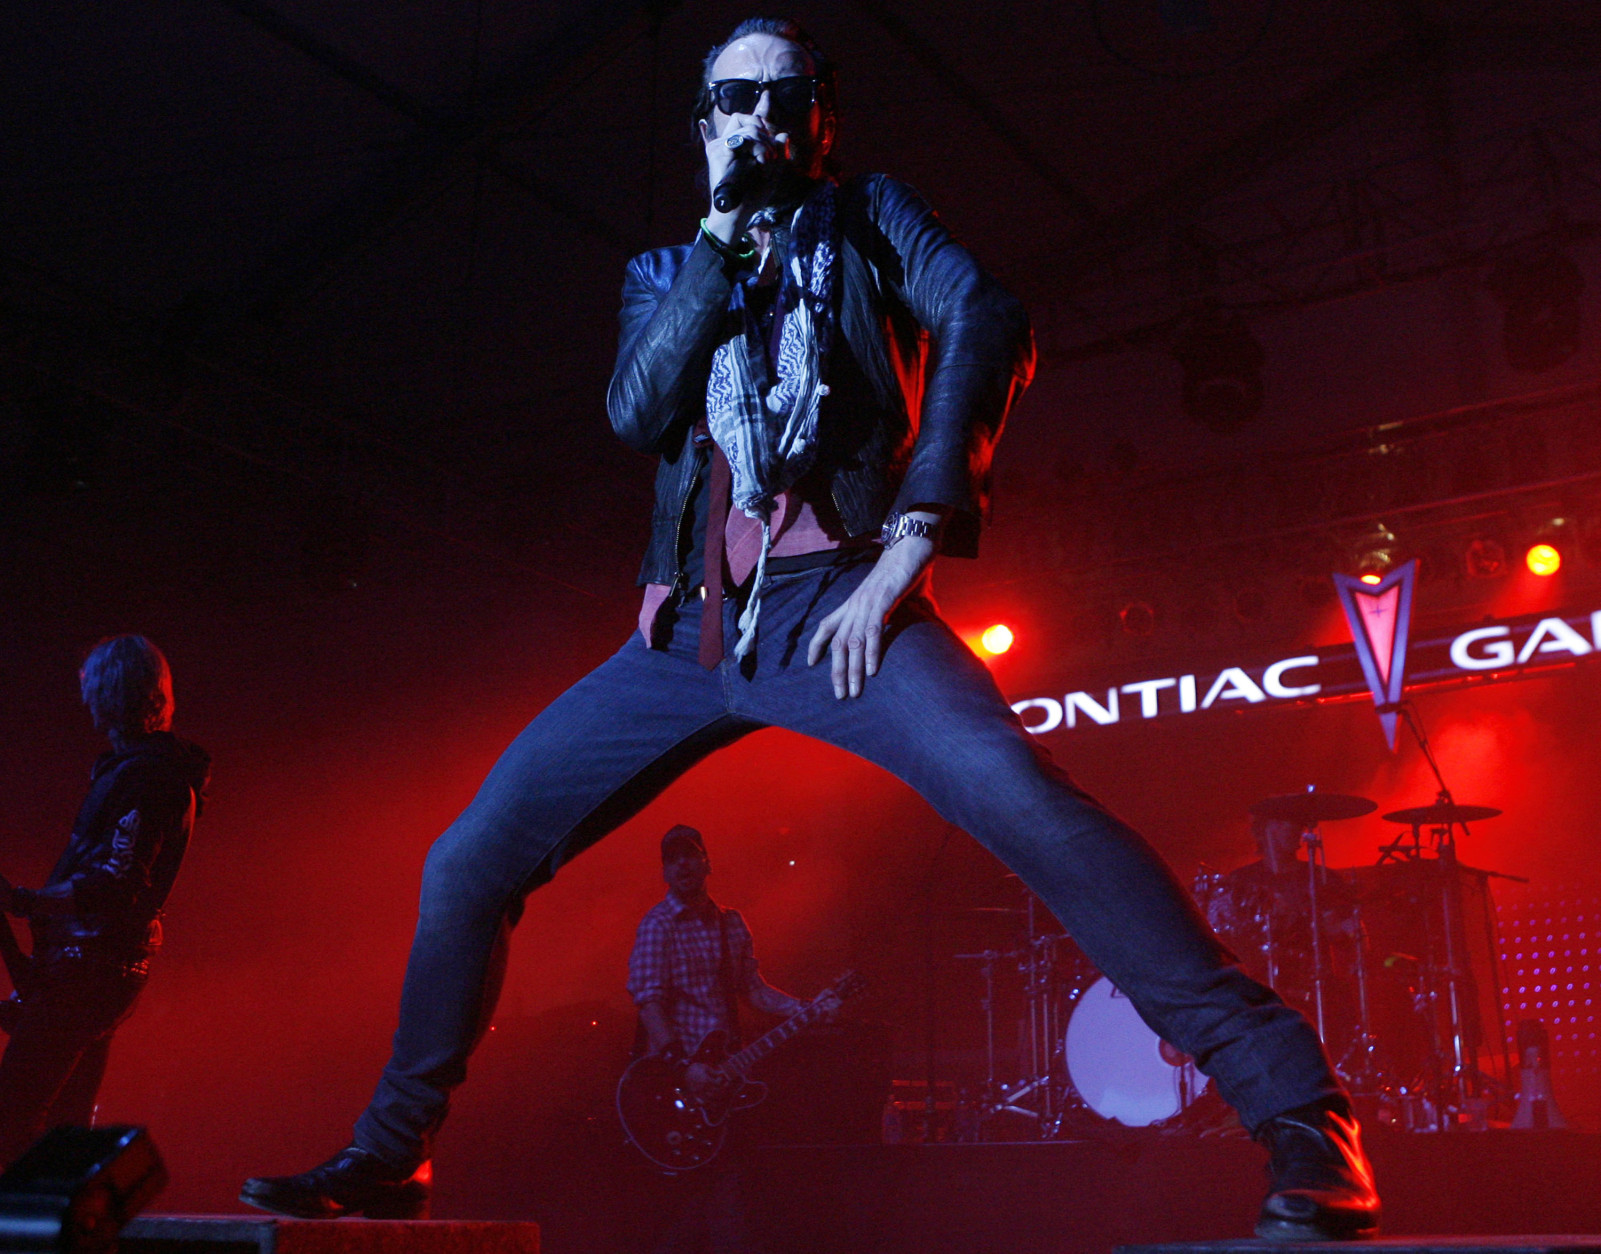 Scott Weiland, of the band Velvet Revolver, performs with the band at the 944 Magazine Super Bowl party in Scottsdale, Ariz. on Saturday, Feb. 2, 2008. (AP Photo/ Matt Sayles)